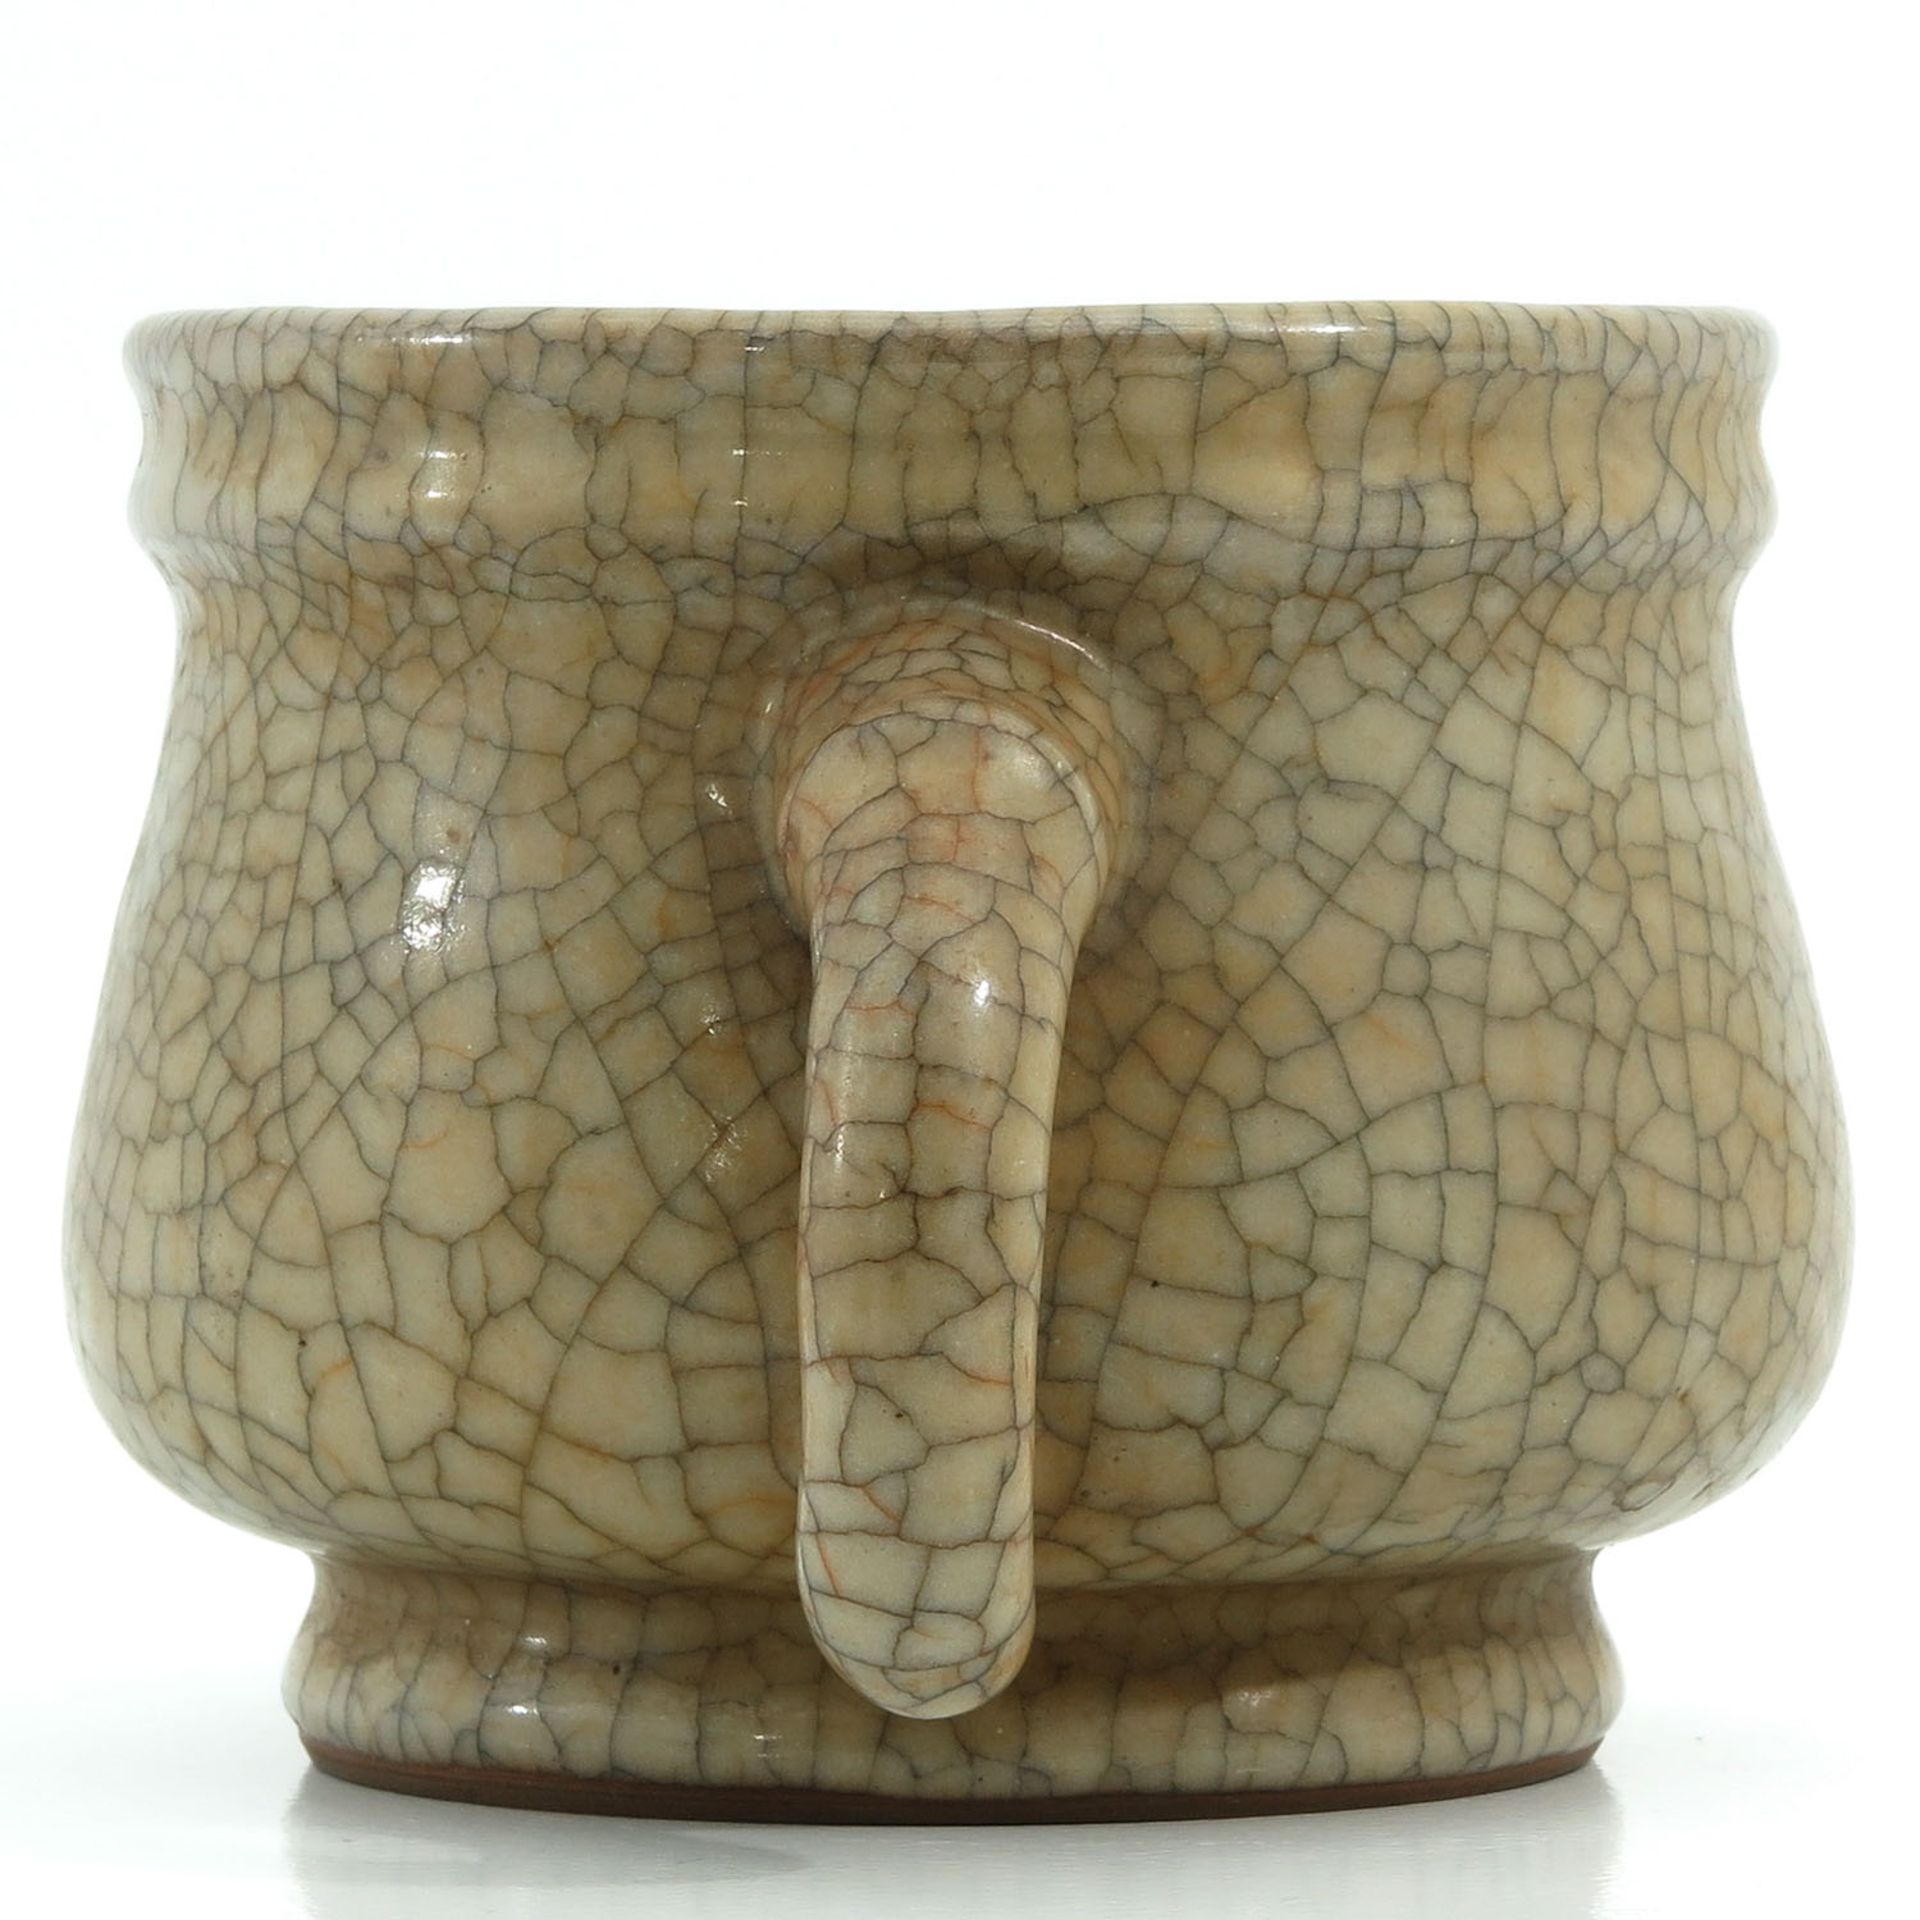 A Crackle Decor Vase with Handles - Image 4 of 9